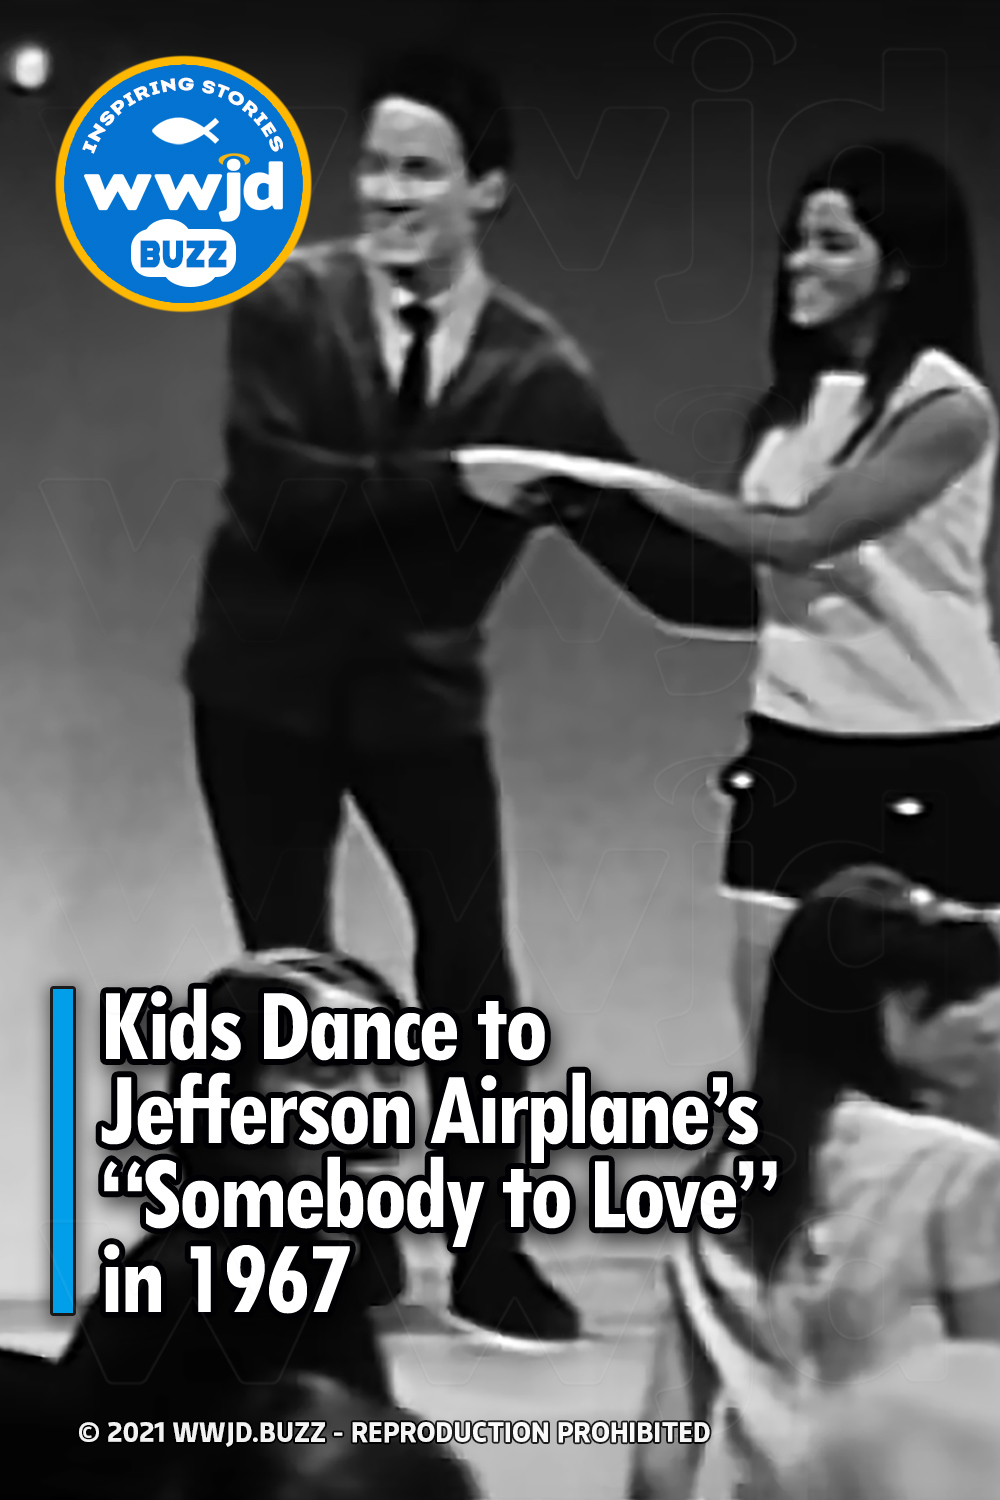 Kids Dance to Jefferson Airplane’s “Somebody to Love” in 1967